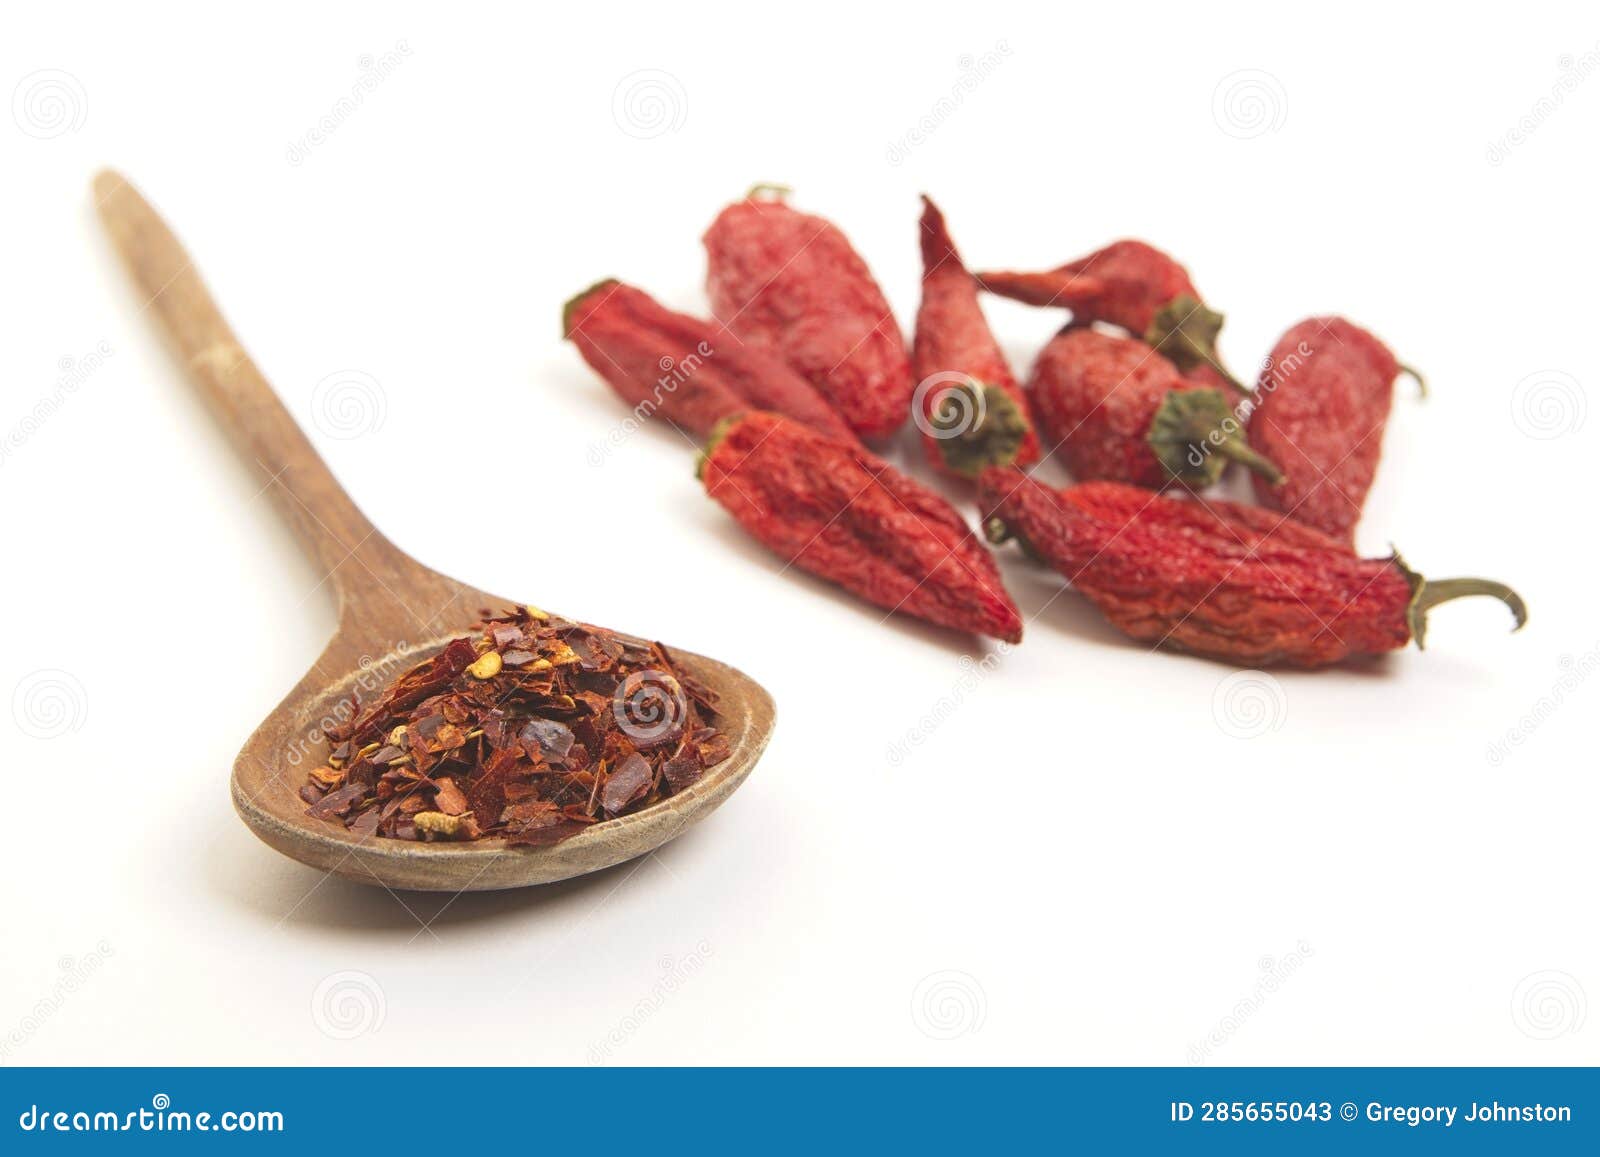 pepper flakes on a spoon and whole peppers